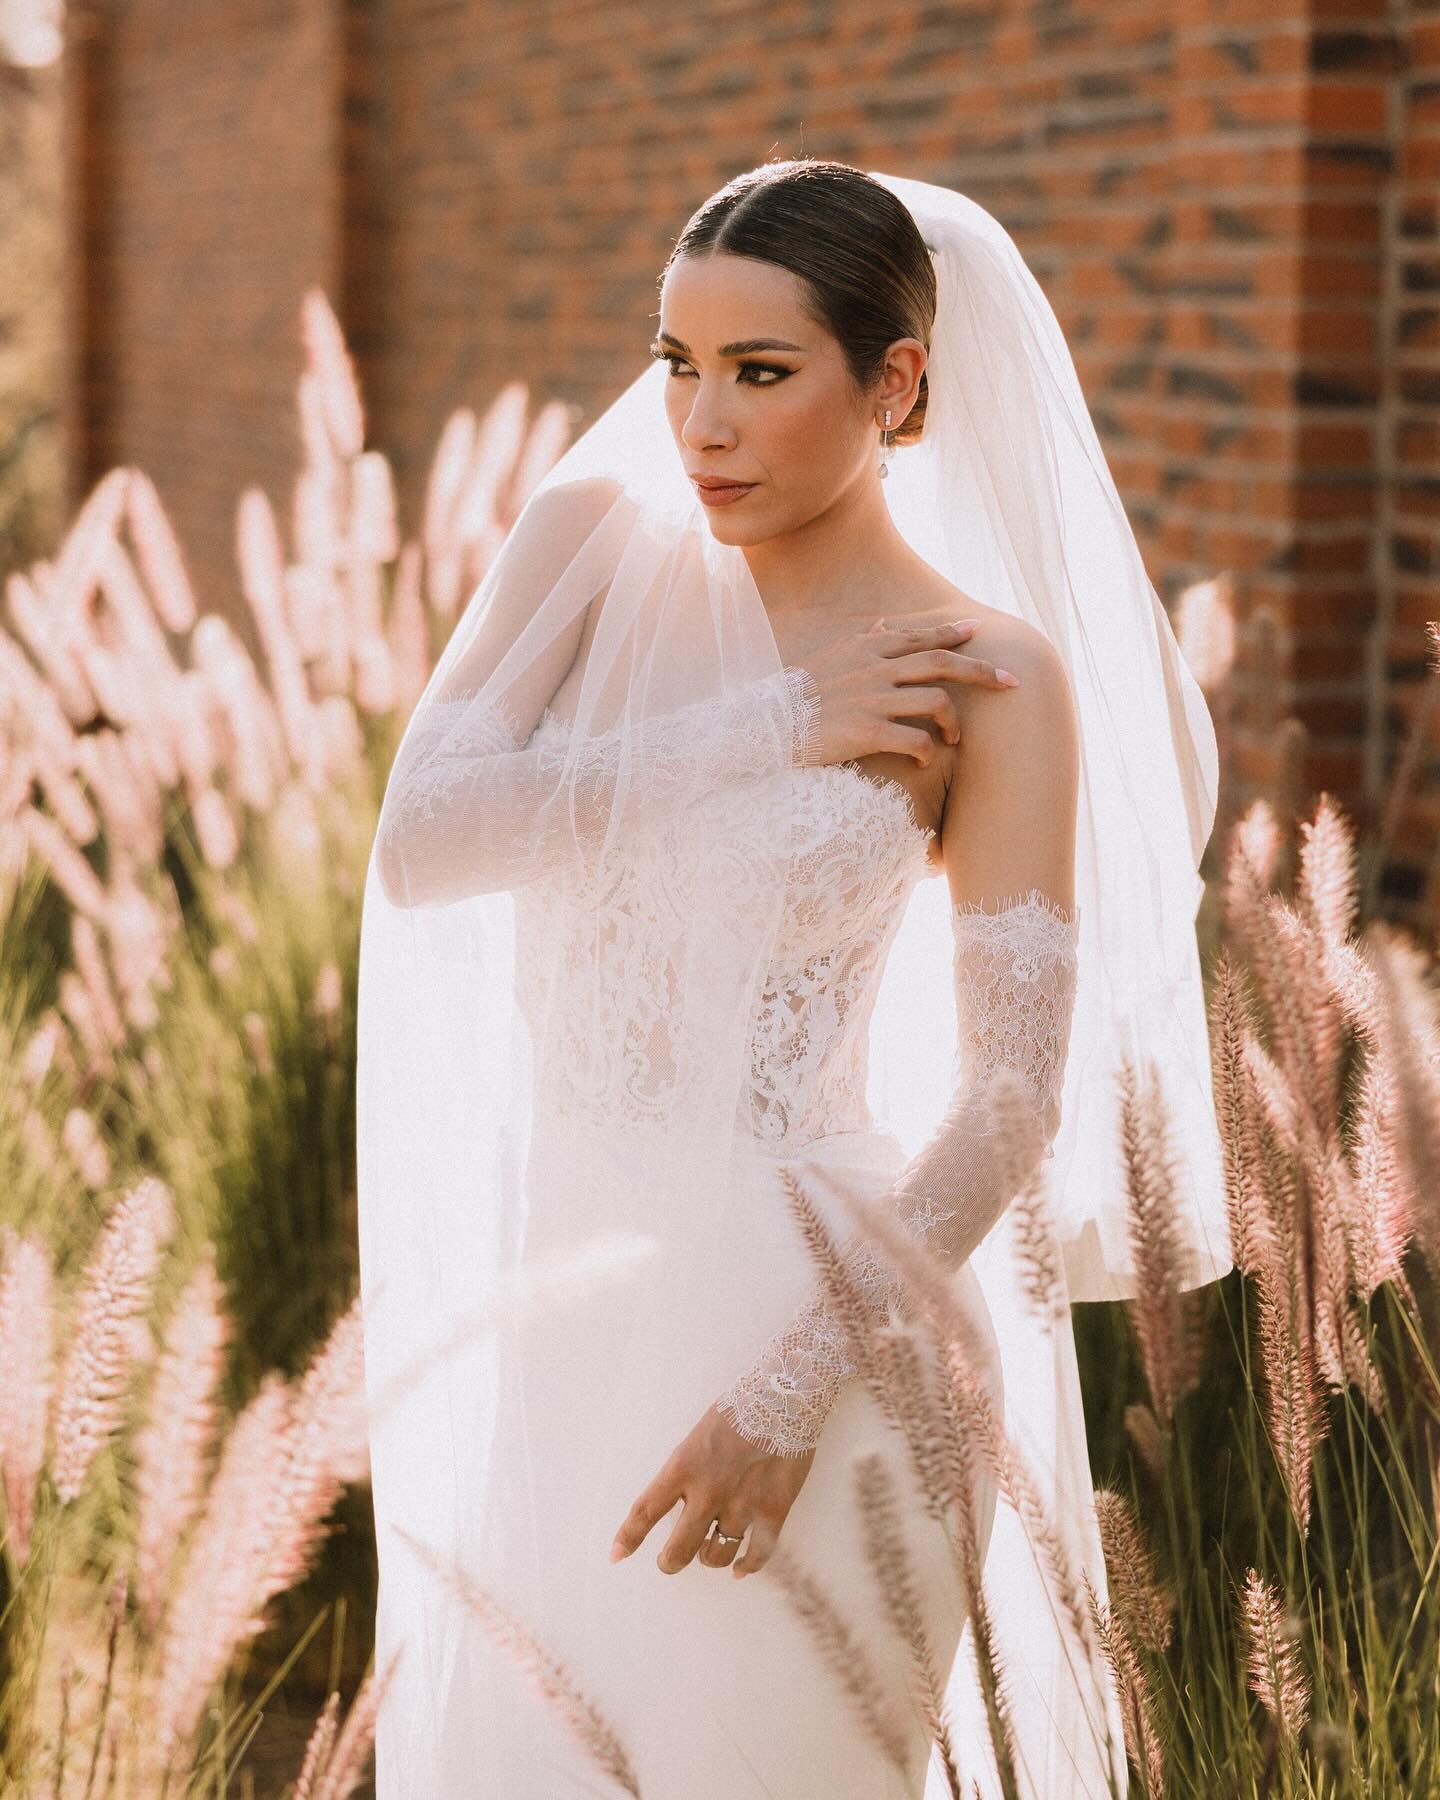 Natasha in our Cathedral Two tier / Tulle Liso / Ivory / wedding veil and Chantilly Sleeves
.
Foto @marcocarpiowp